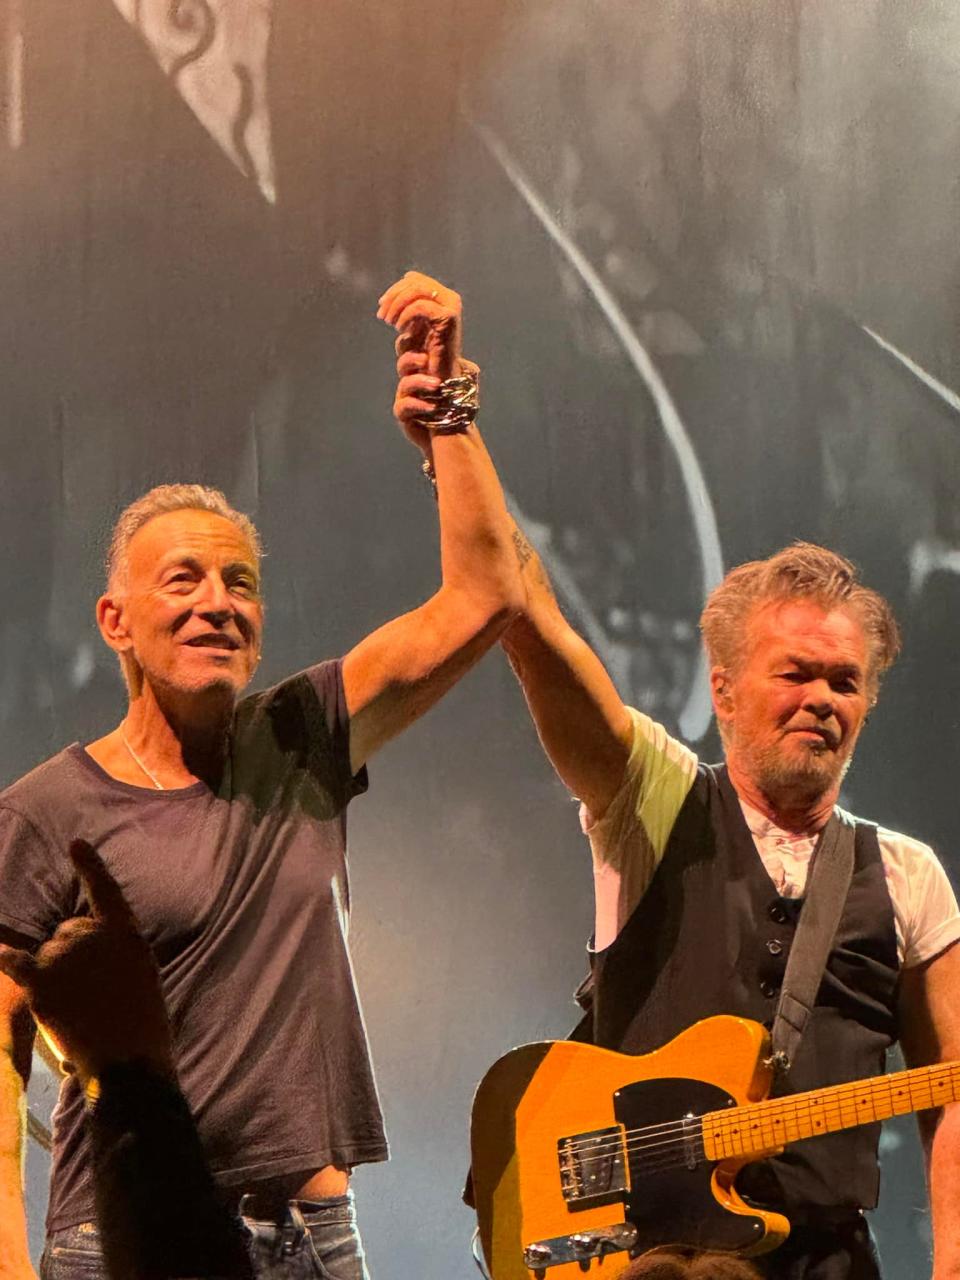 Bruce Springsteen joined John Mellencamp on stage March 10 at the New Jersey Performing Arts Center in Newark.